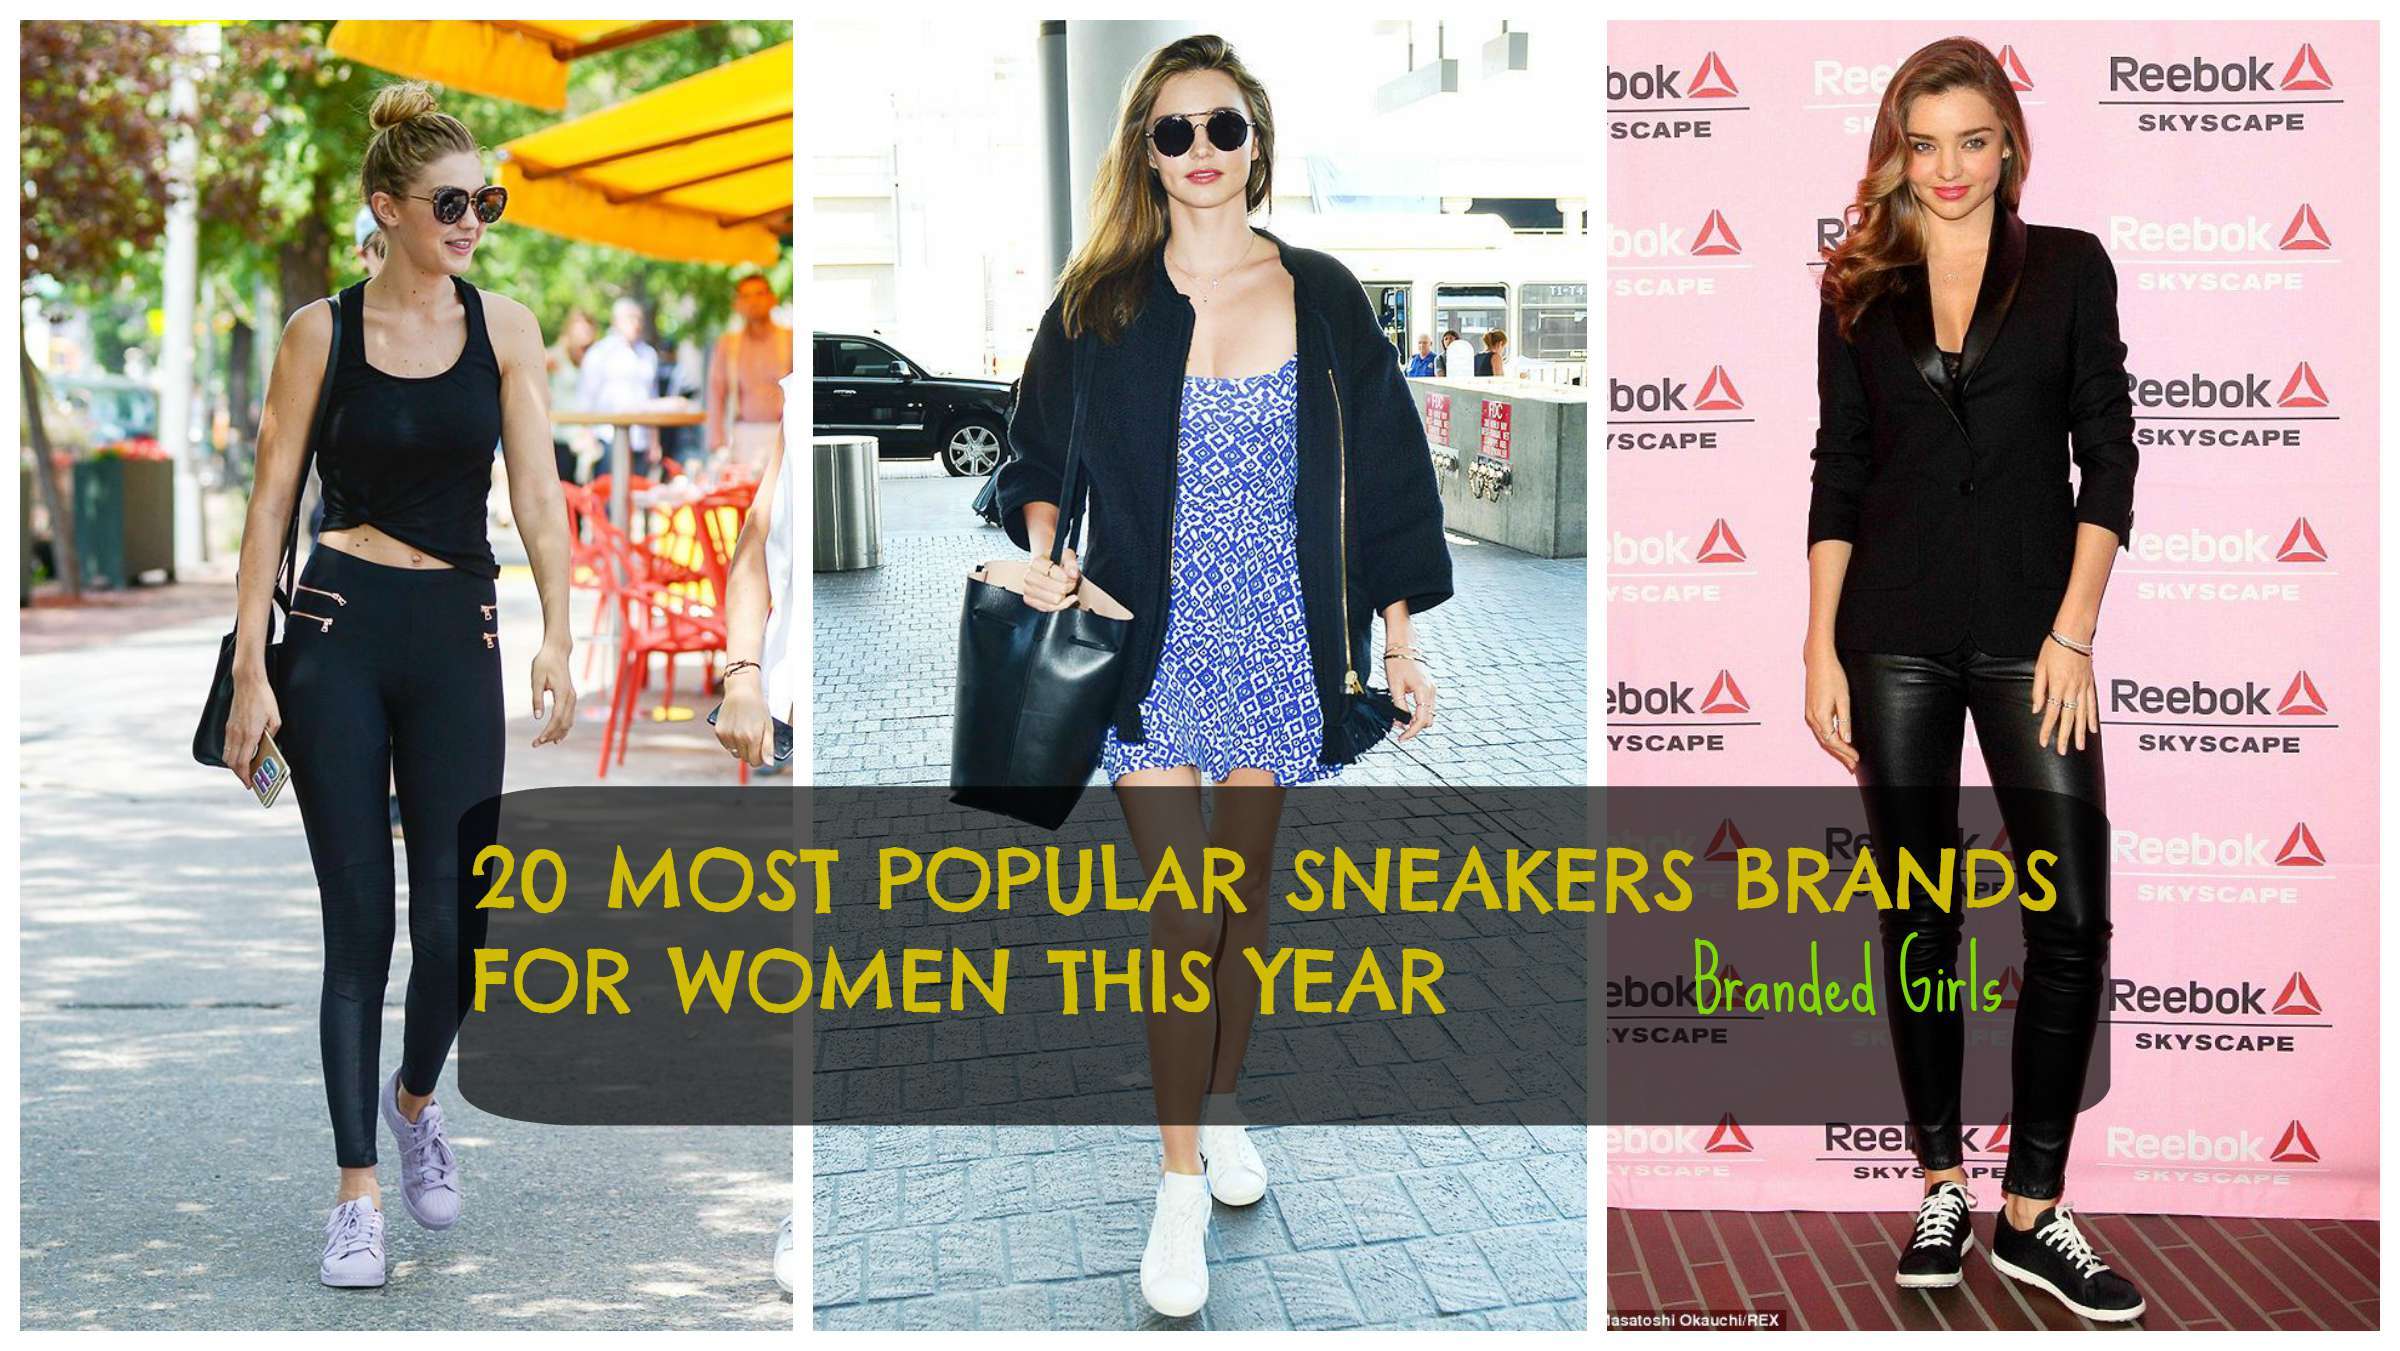 Top 20 Branded Sneakers for Women 2020 – Celebrities Choice